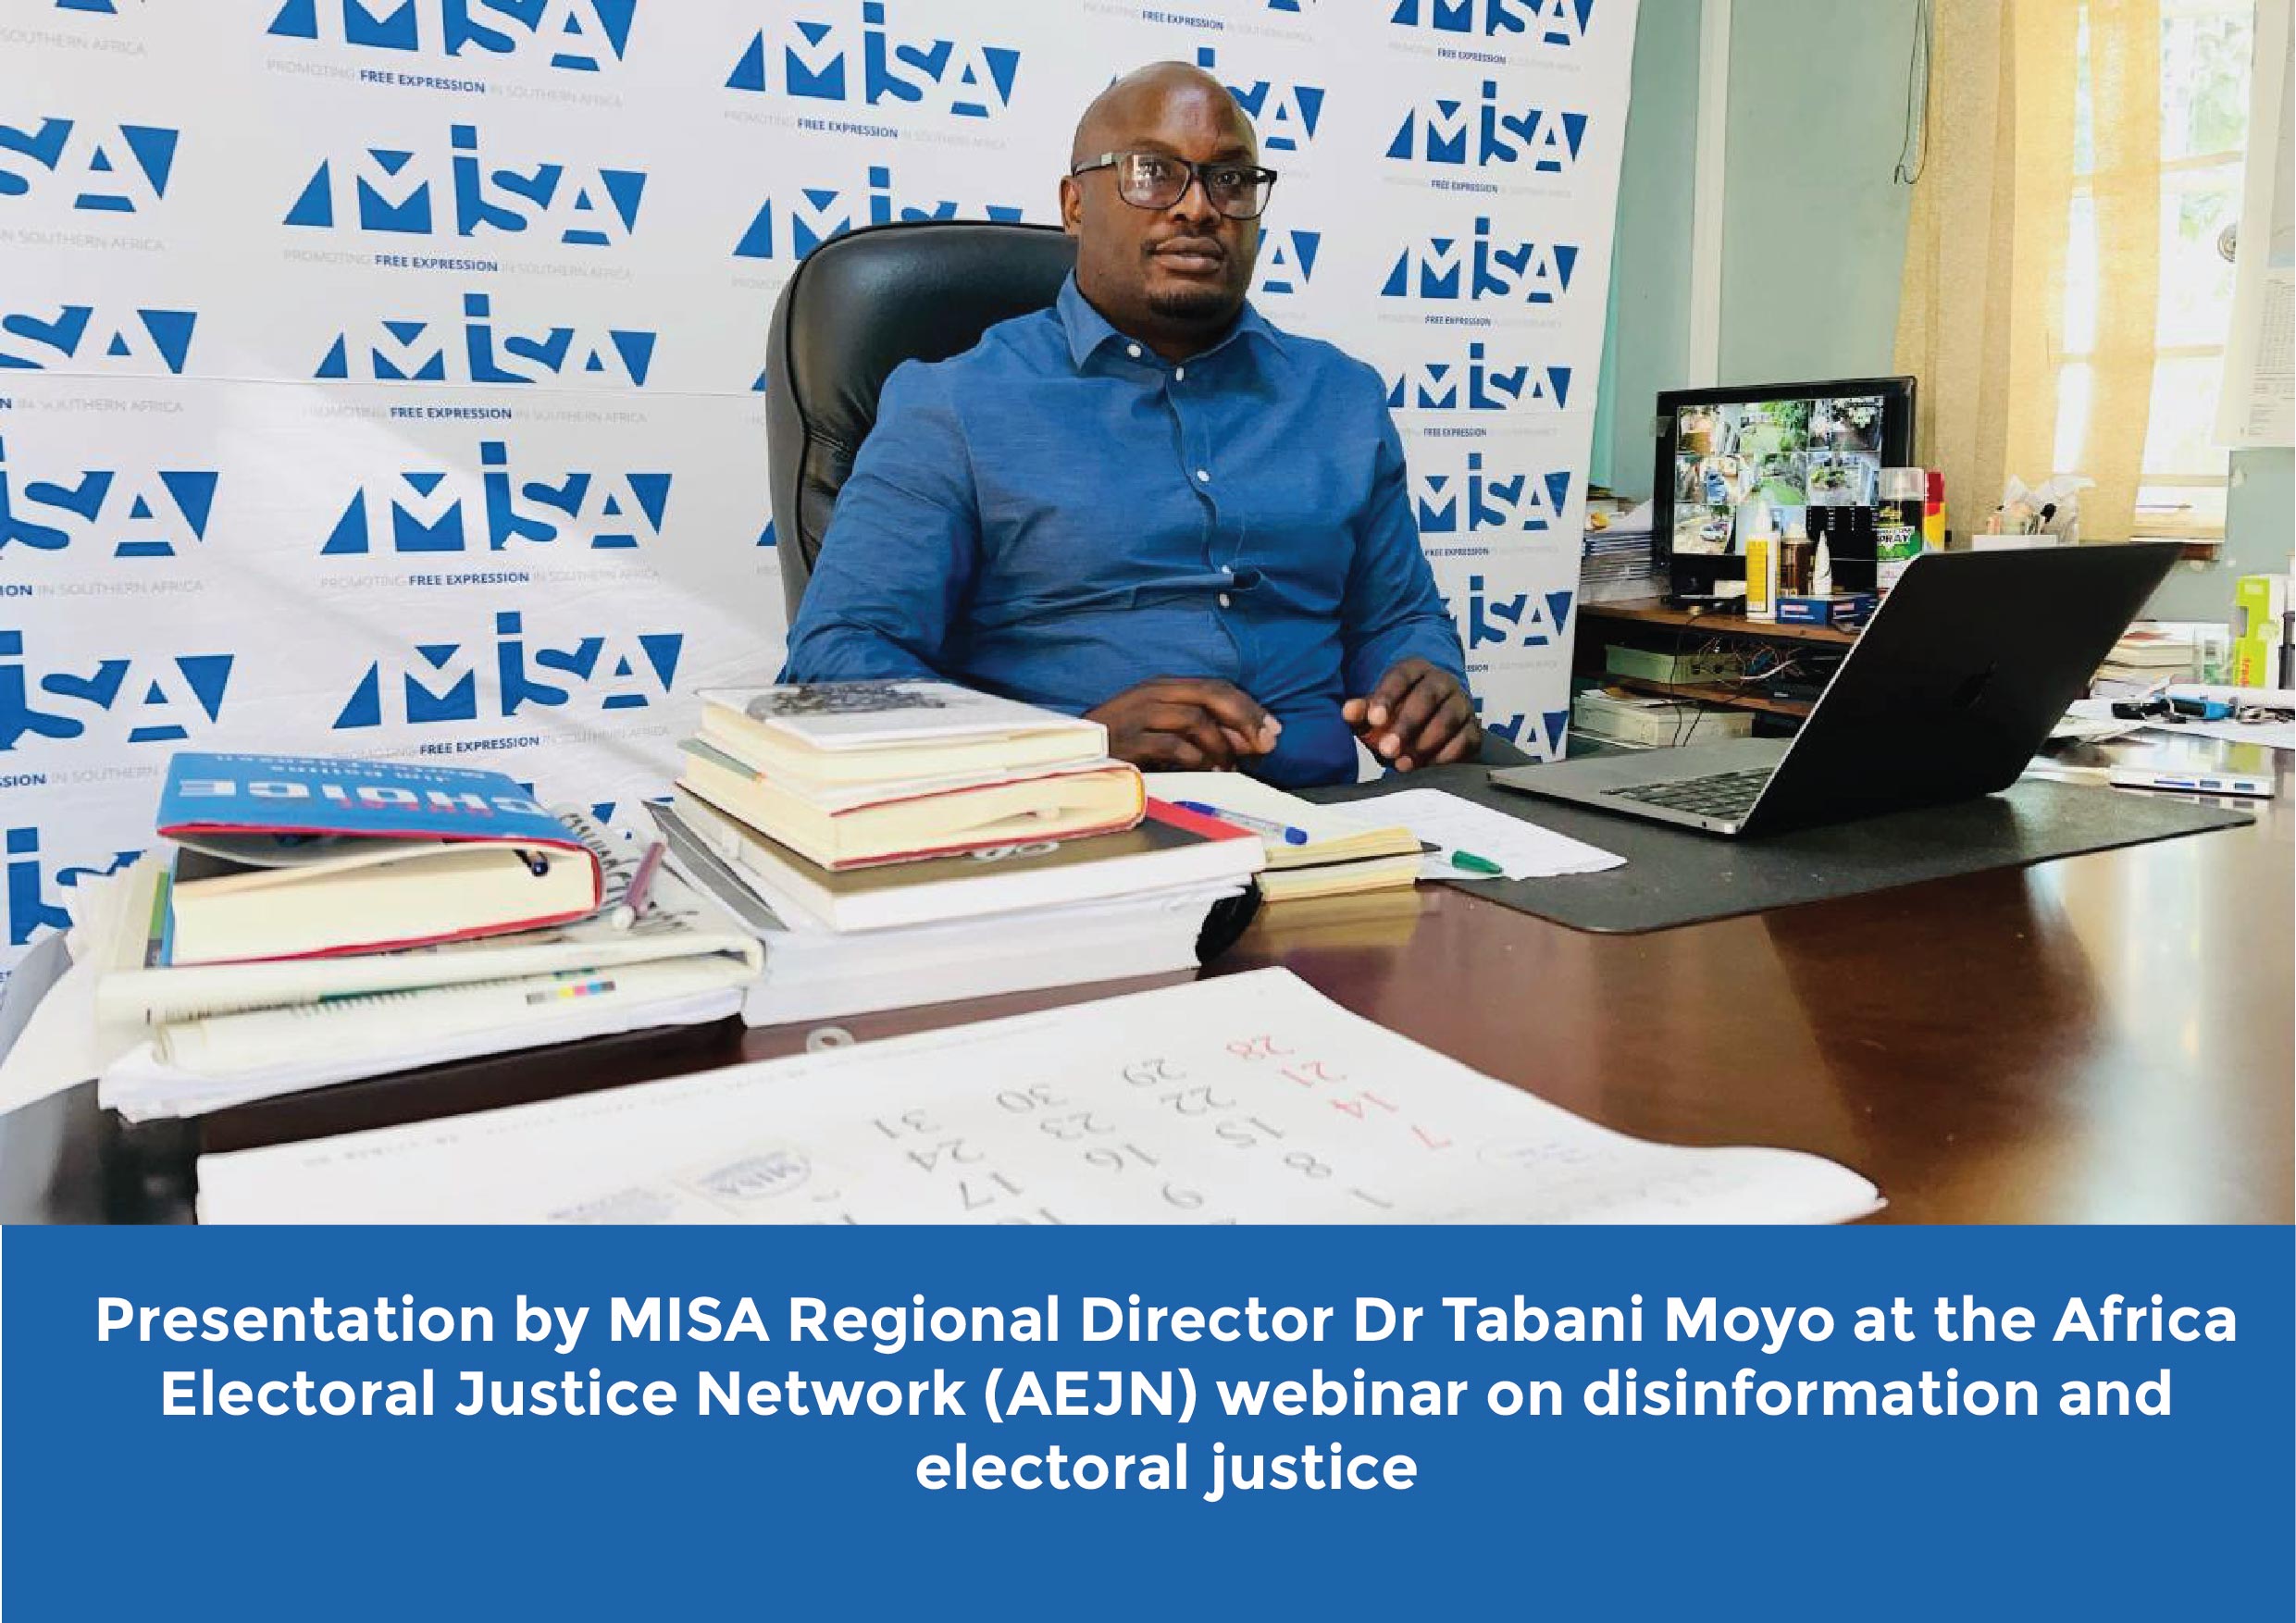 Presentation by MISA Regional Director Dr Tabani Moyo at the Africa Electoral Justice Network (AEJN) webinar on disinformation and electoral justice